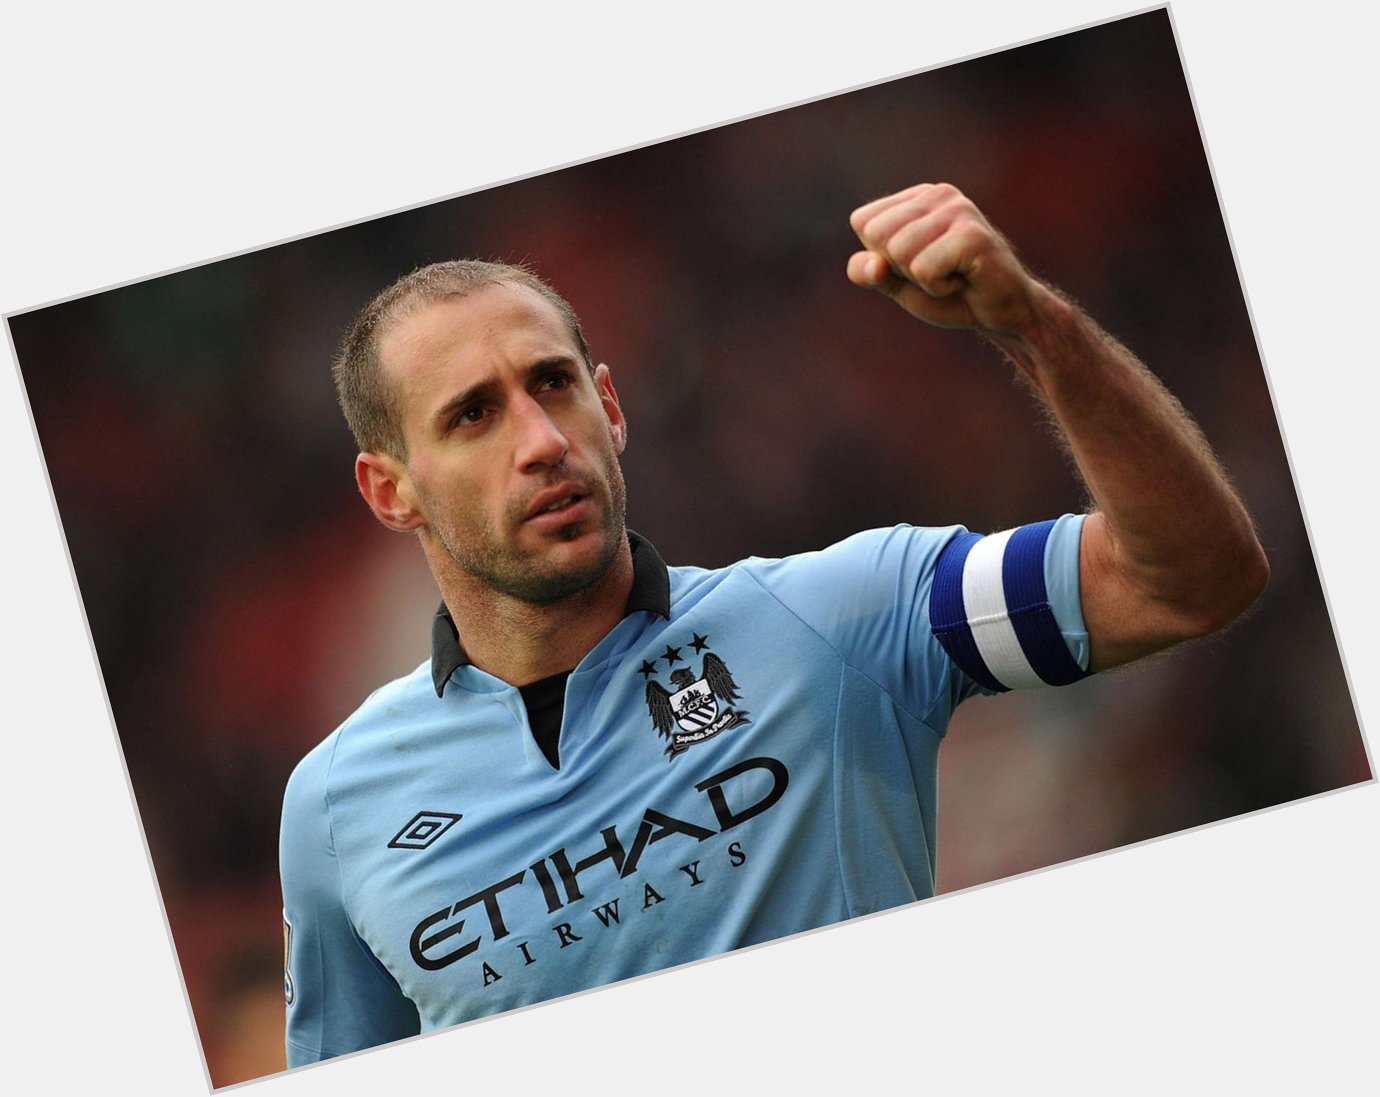 Happy Birthday to defender Pablo Zabaleta. He turns 30 today. Make sure you have a good day 